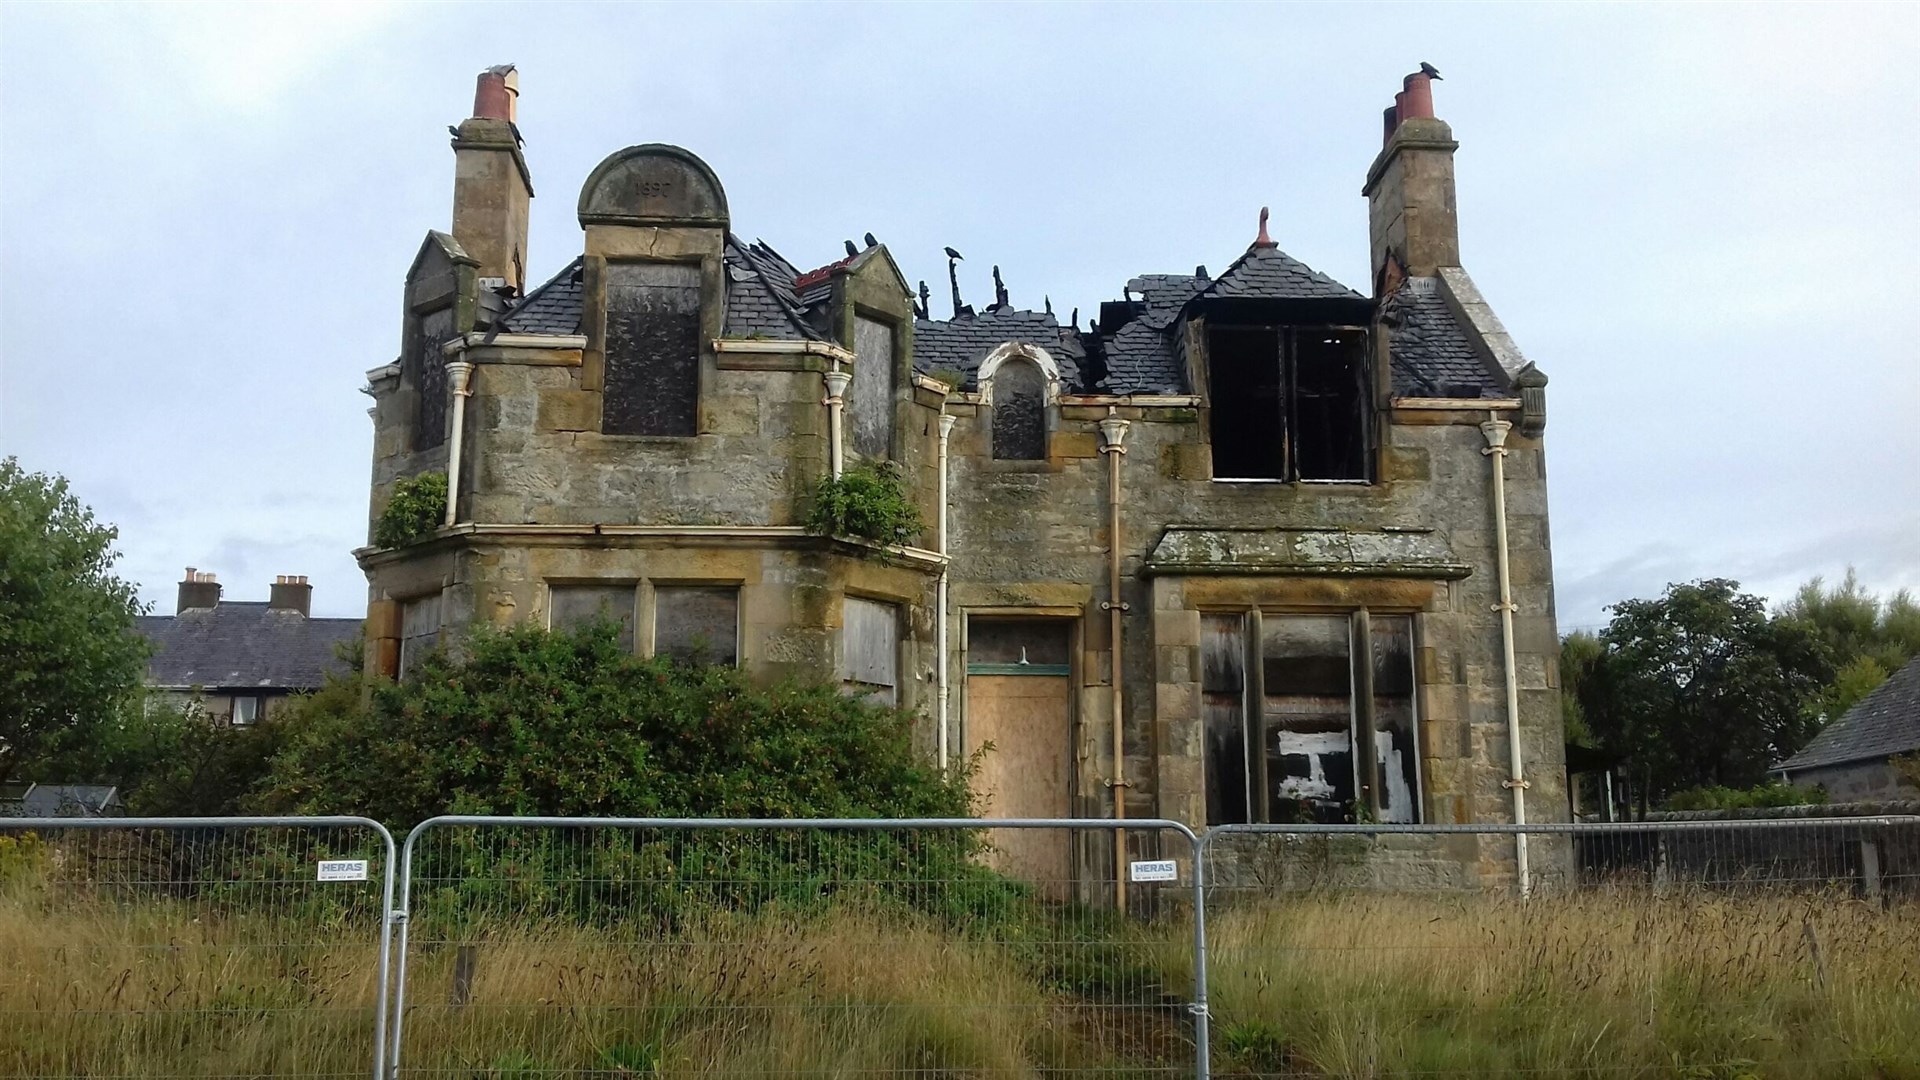 This empty property in Lossiemouth was compulsory purchased by Moray Council after lying empty for years.